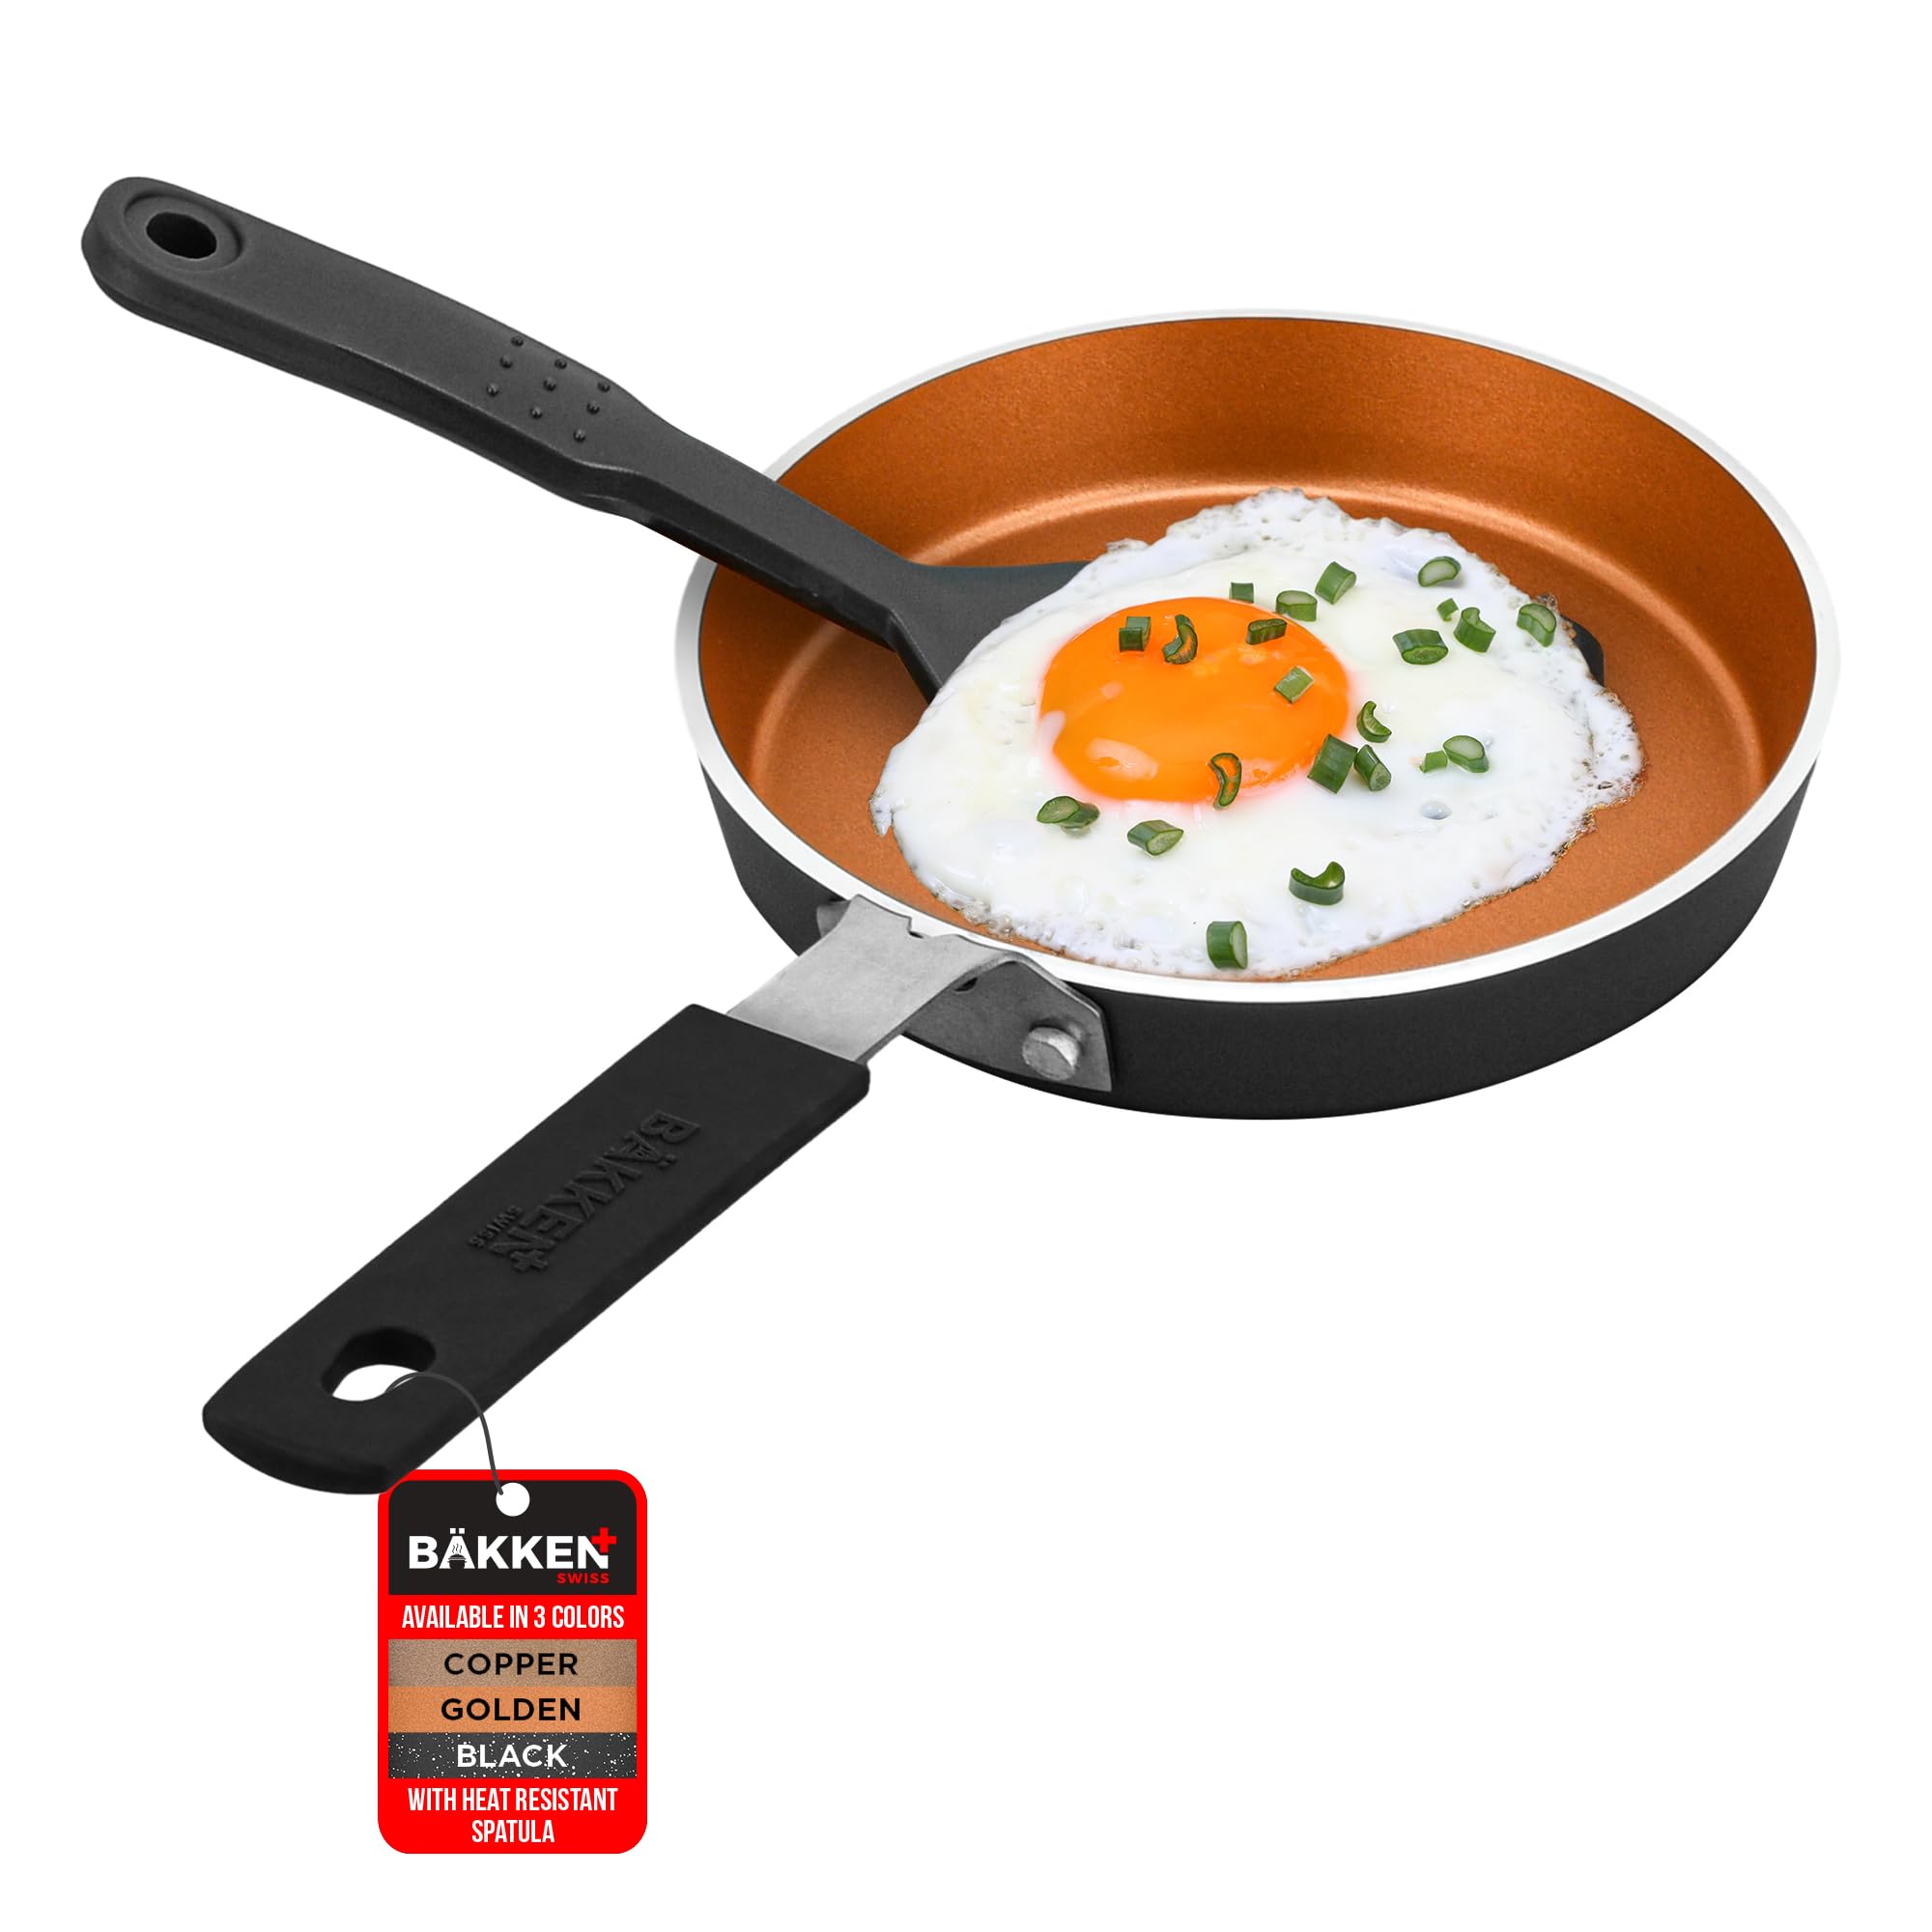 Bakken- Swiss 2-Piece Mini Nonstick Egg Pan & Omelet Pan – Egg Pan [5.5''] with Copper Non-Stick, Skillet – Eco-Friendly –for Eggs Pancakes, for All Stoves - Non Toxic, Dishwasher Safe